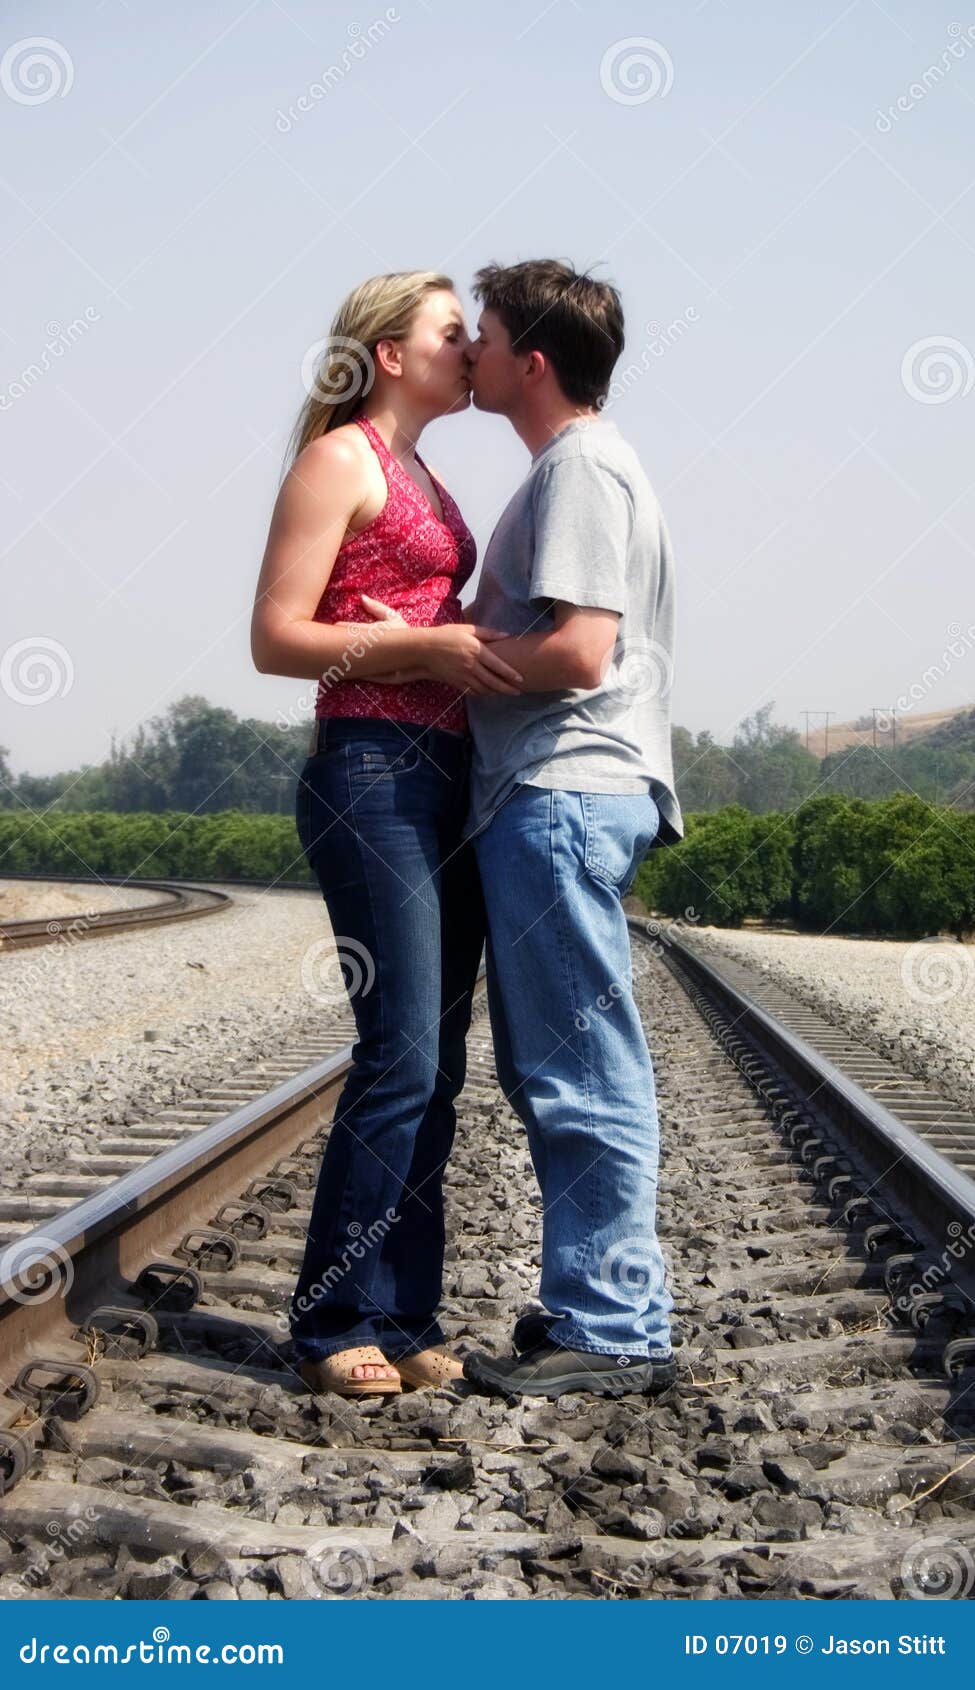 Kissing Couple Stock Image Image Of Teens Kissing Tra